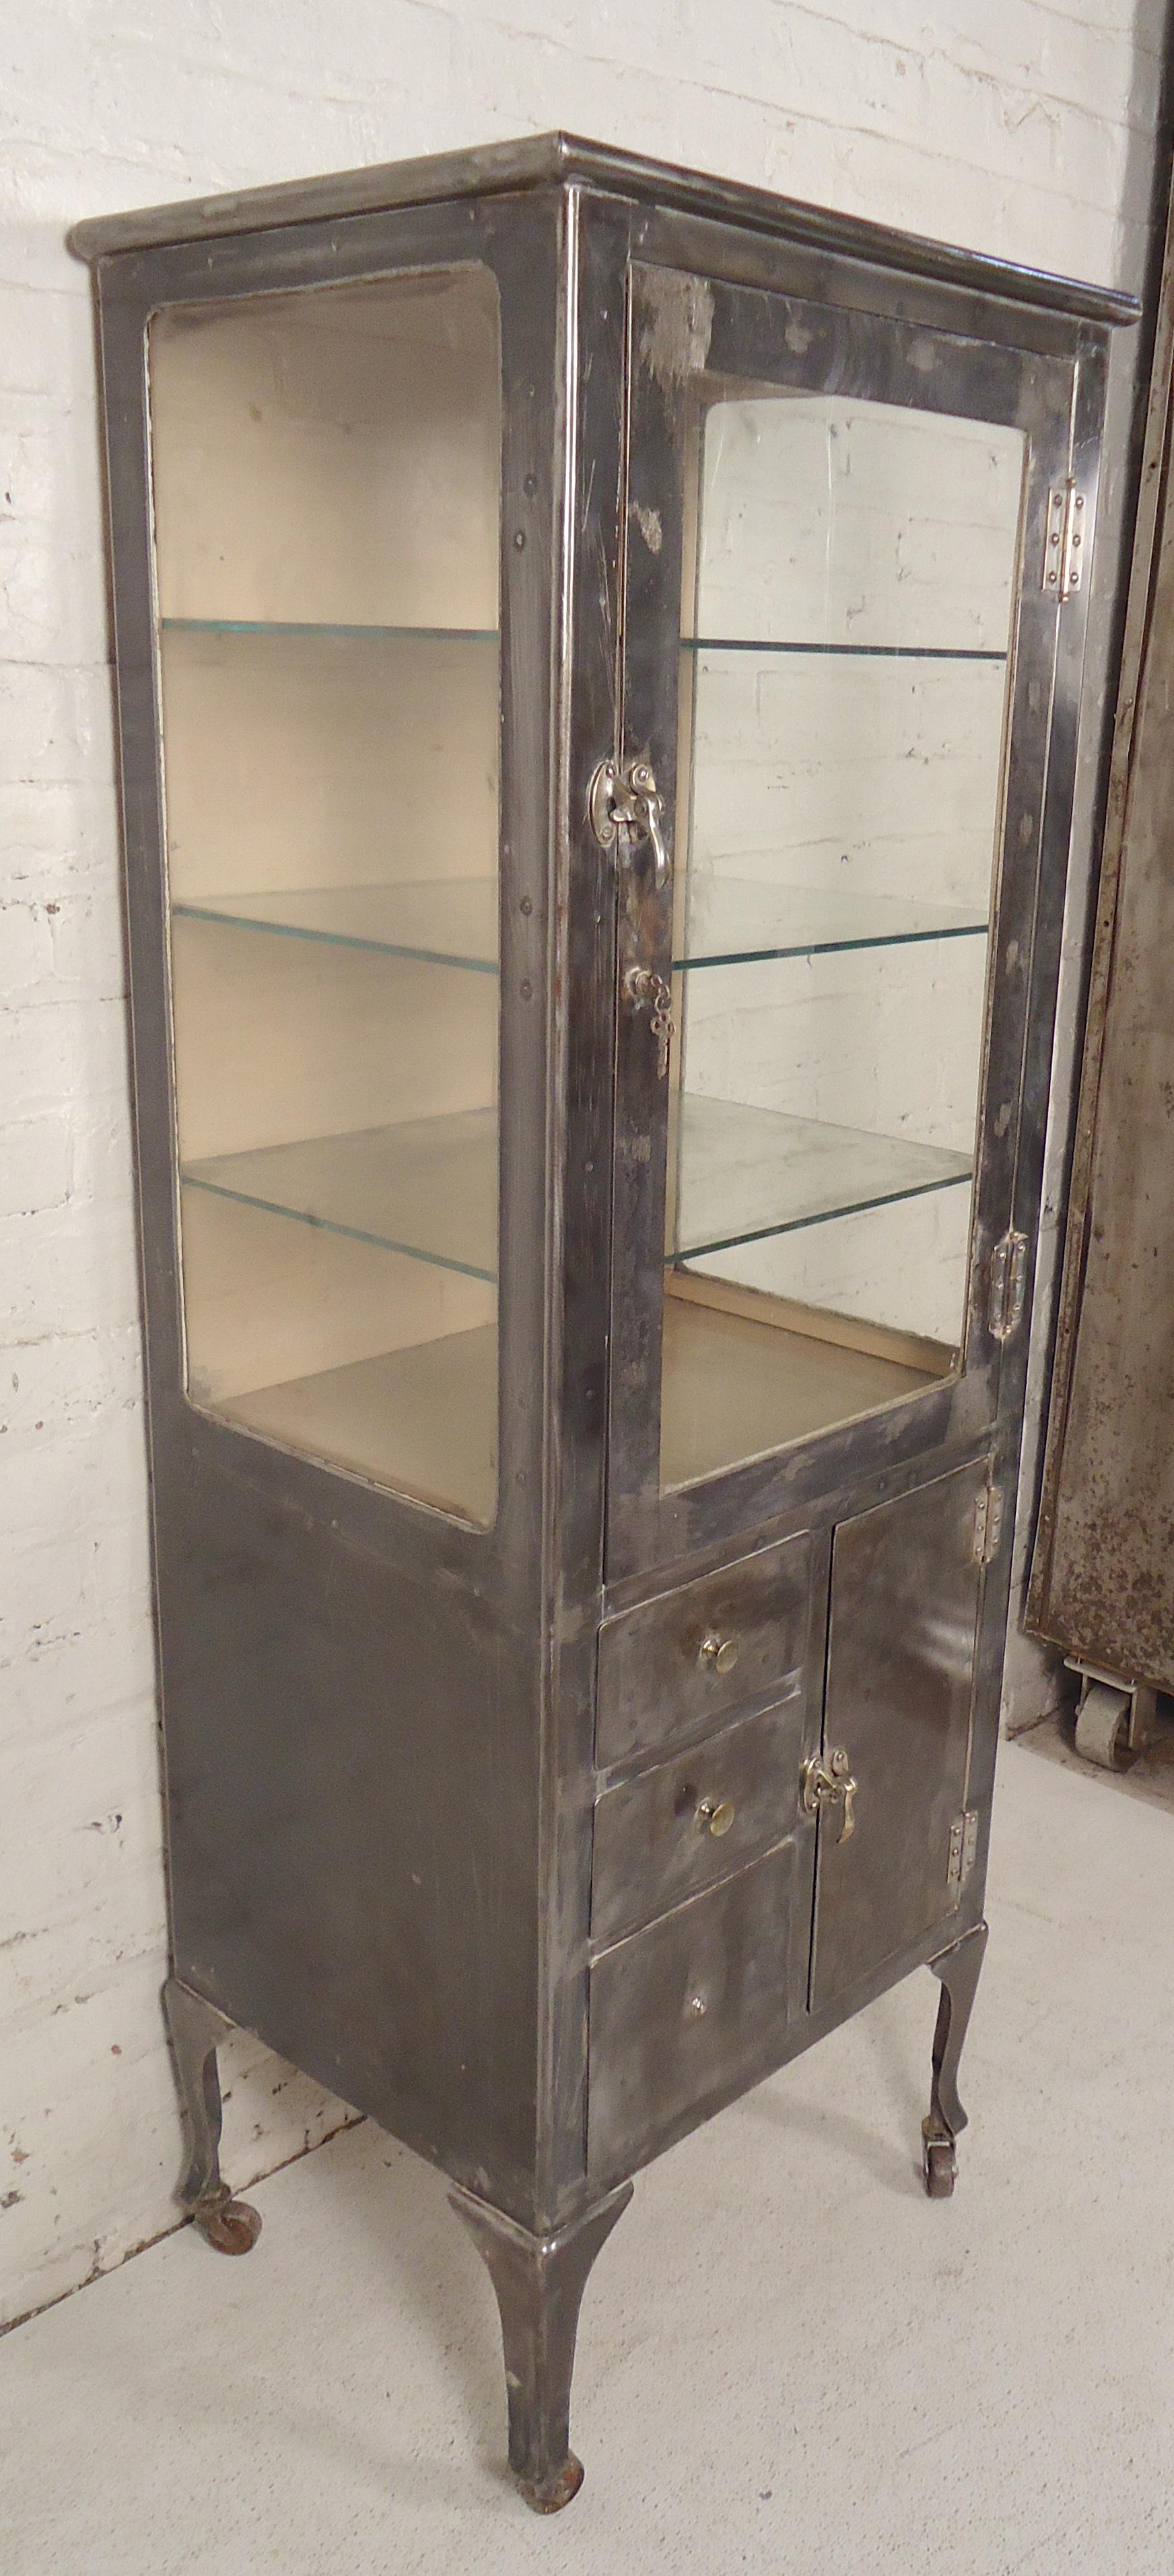 Antique dental cabinet refinished in a bare metal style finish. Great modern storage or display case.

(Please confirm item location - NY or NJ - with dealer).
 